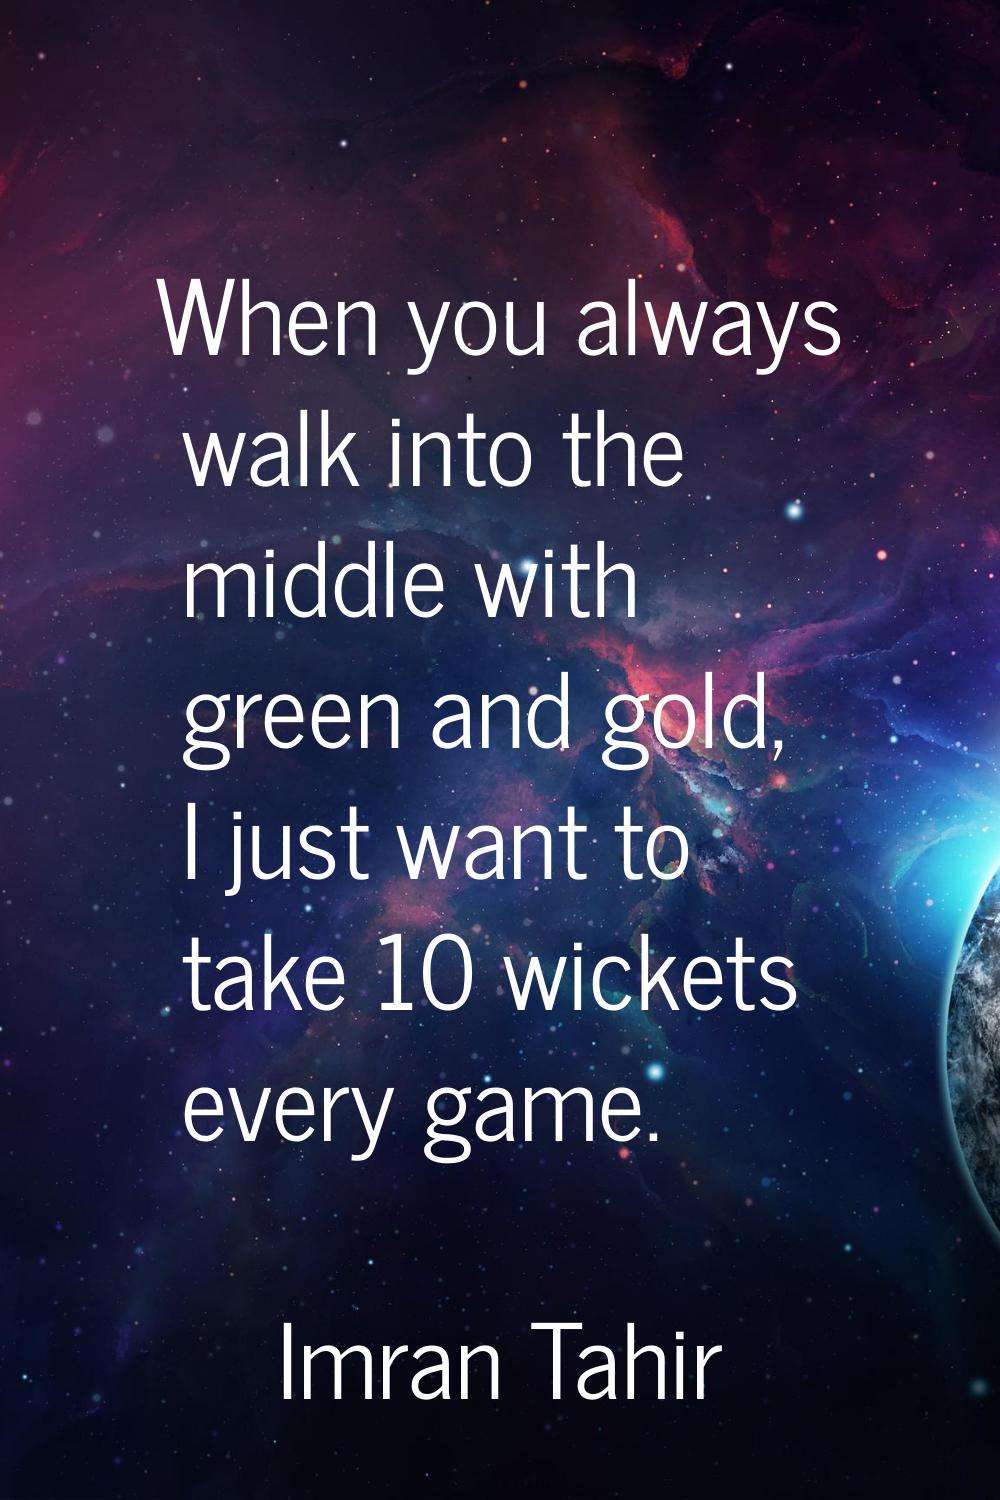 When you always walk into the middle with green and gold, I just want to take 10 wickets every game